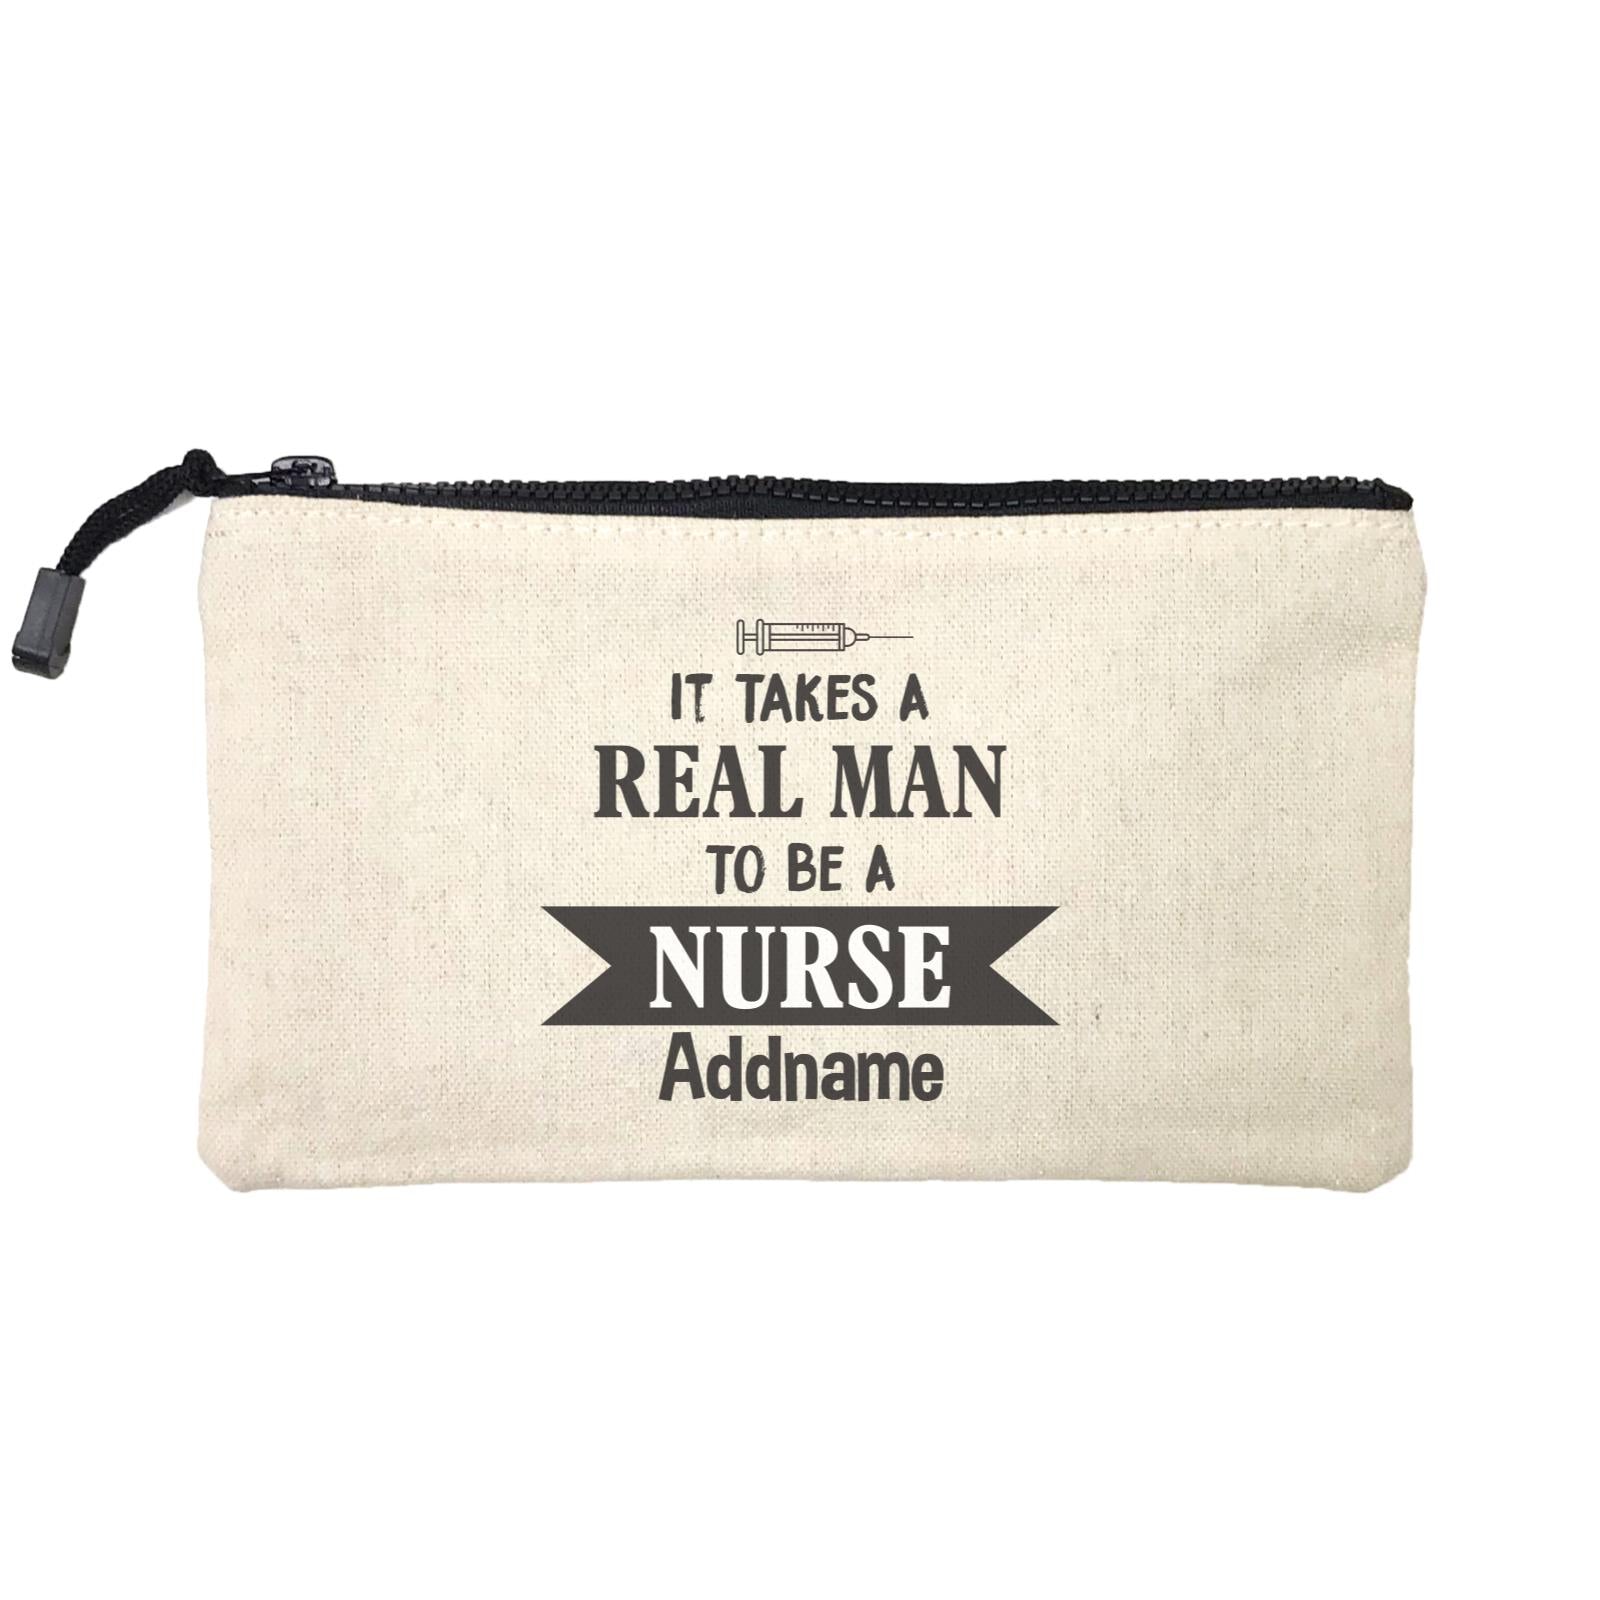 It Takes a Real Man to be a Nurse Mini Accessories Stationery Pouch